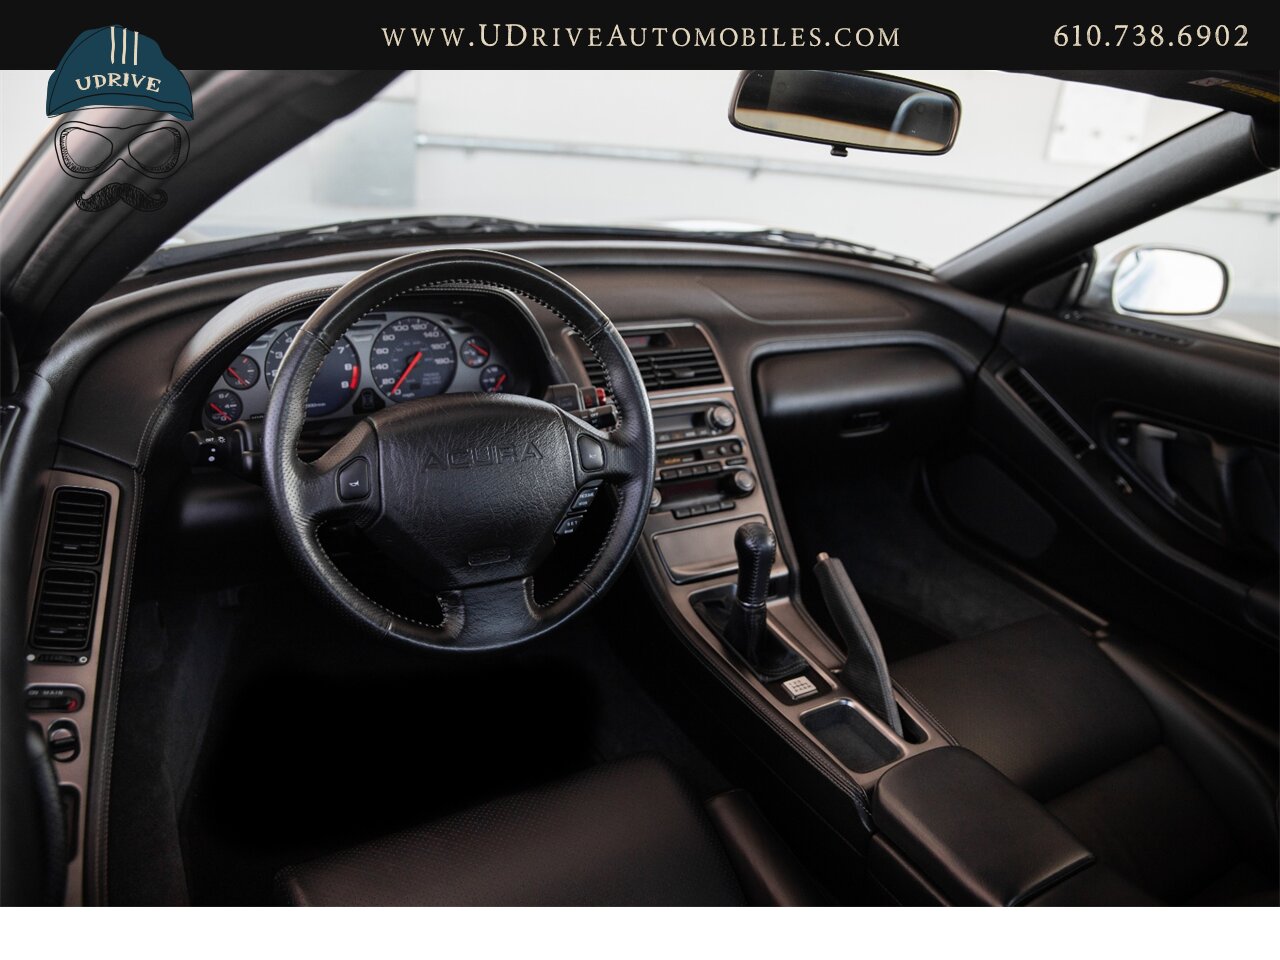 2002 Acura NSX NSX-T 9k Miles 6 Speed Manual Service History  Collector Grade - Photo 7 - West Chester, PA 19382